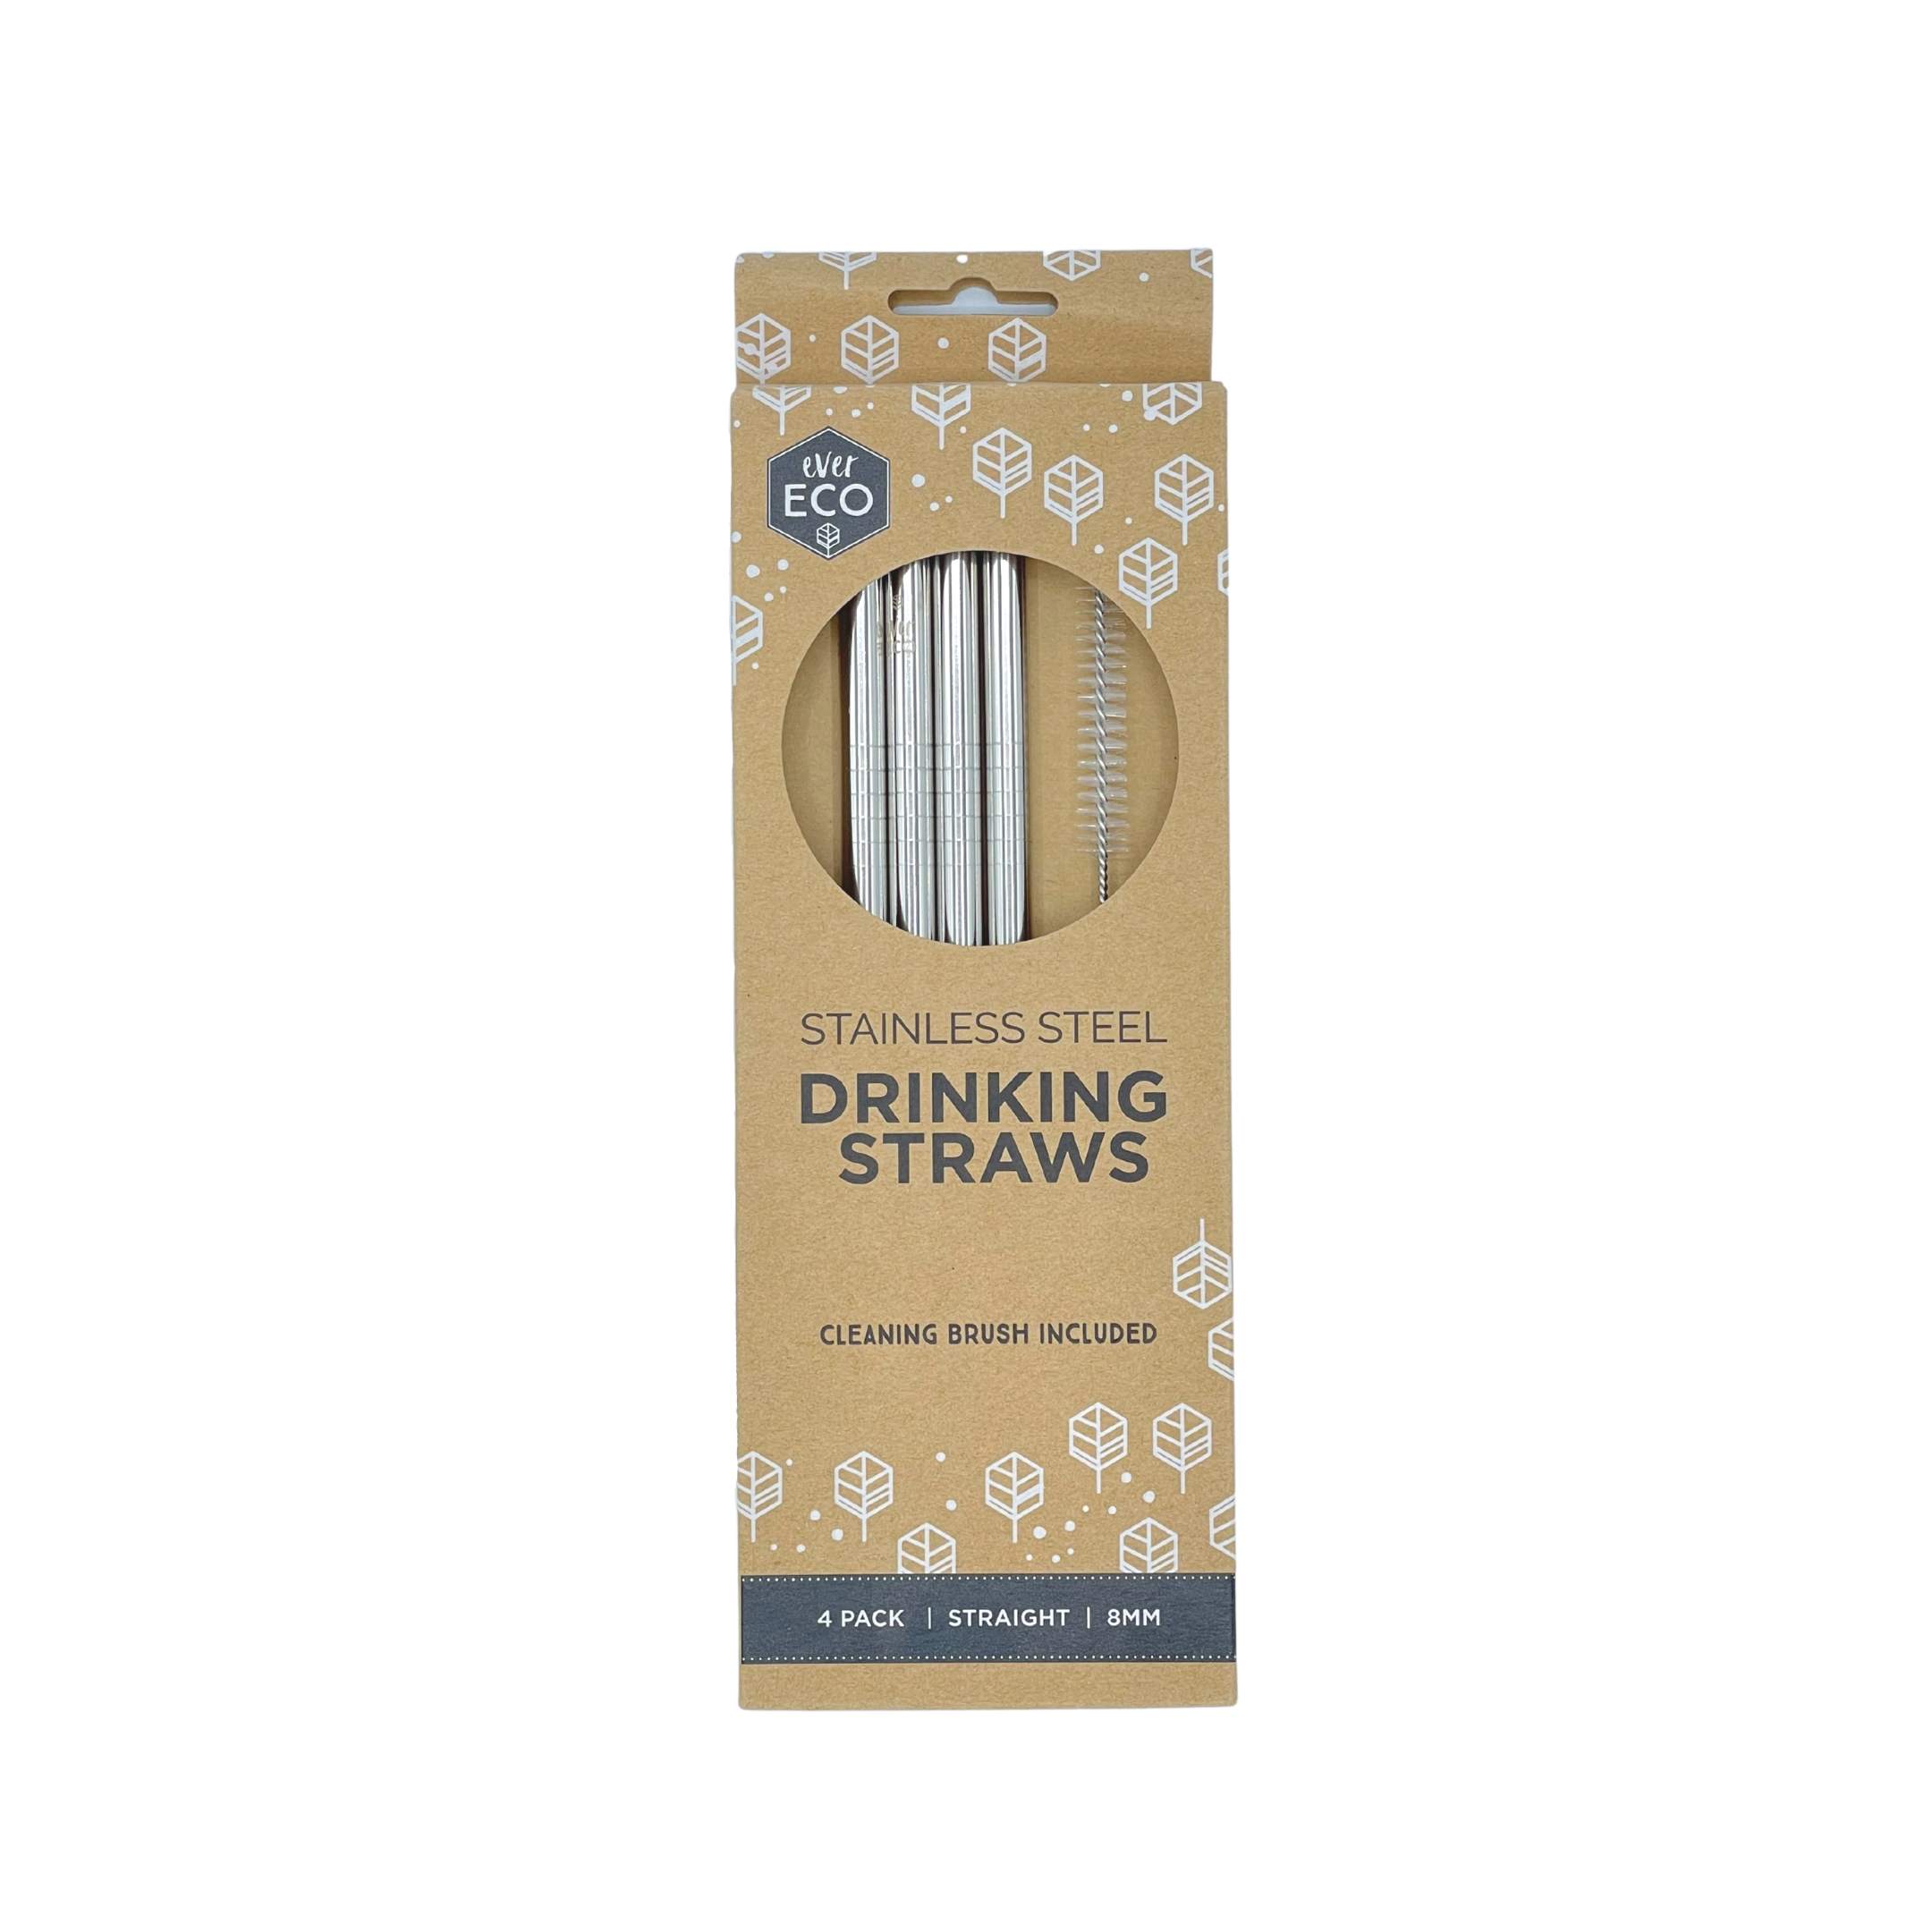 Stainless Steel Drinking Straws 4 pack